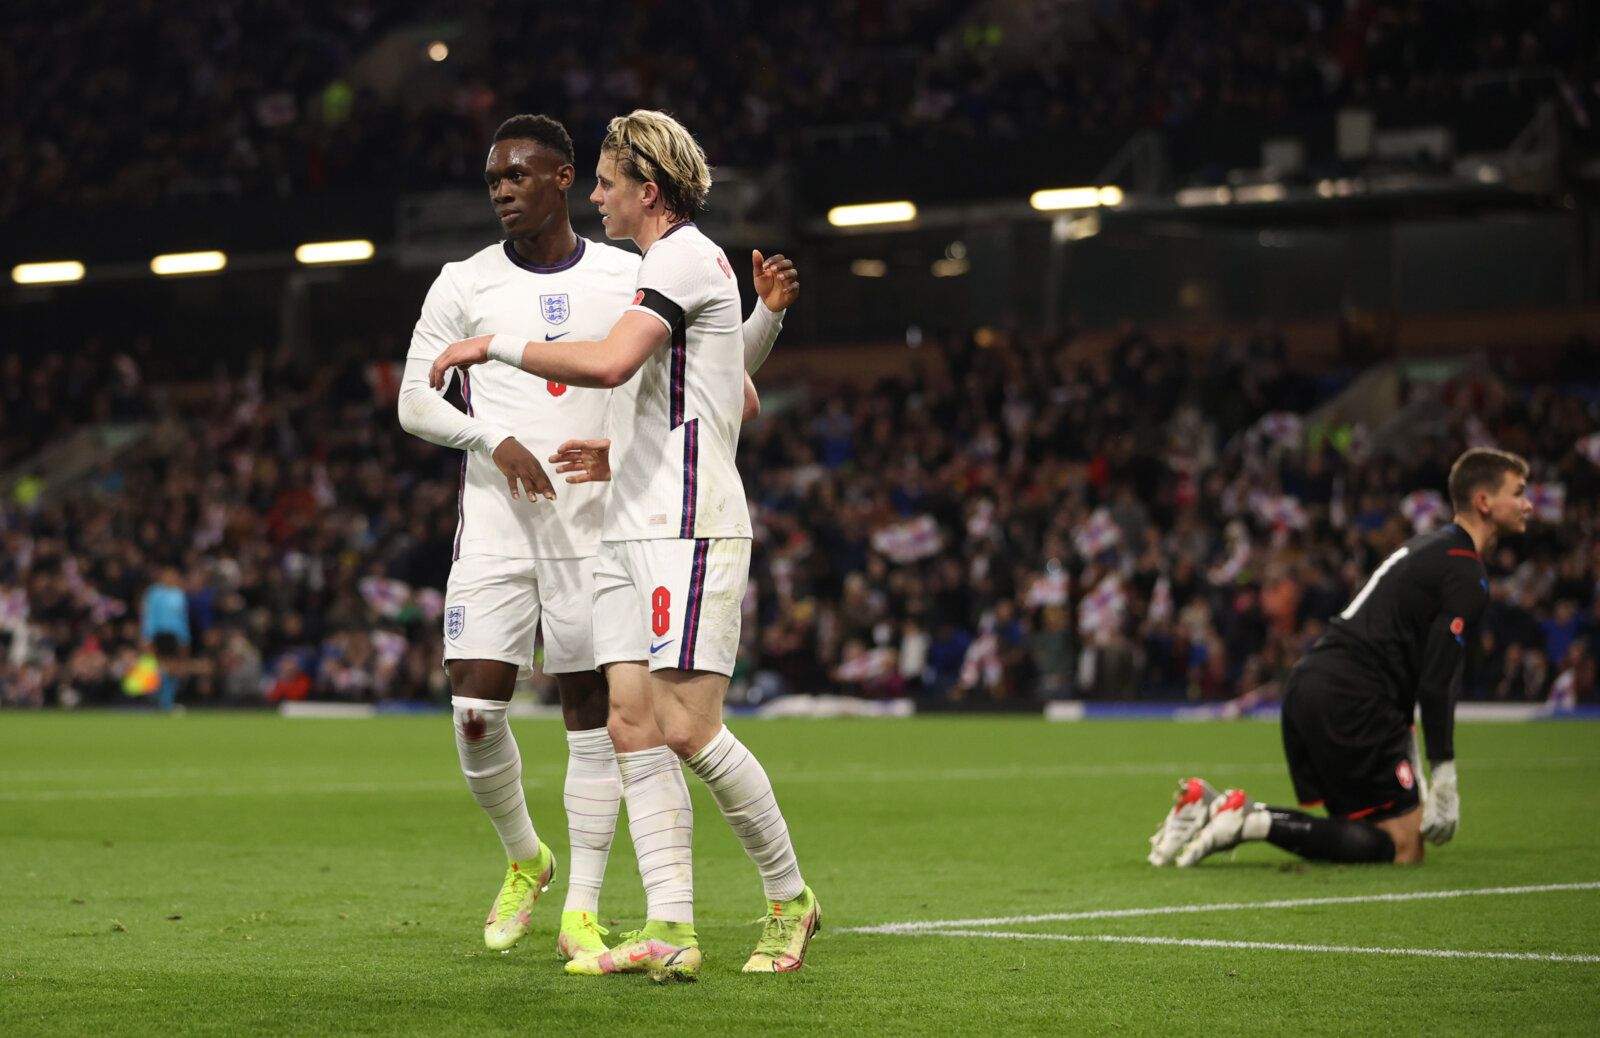 Soccer Football - UEFA Under 21 Championship Qualifiers - Group G - England v Czech Republic - Turf Moor, Burnley, Britain - November 11, 2021 England's Folarin Balogun celebrates scoring their third goal with Conor Gallagher Action Images via Reuters/Molly Darlington